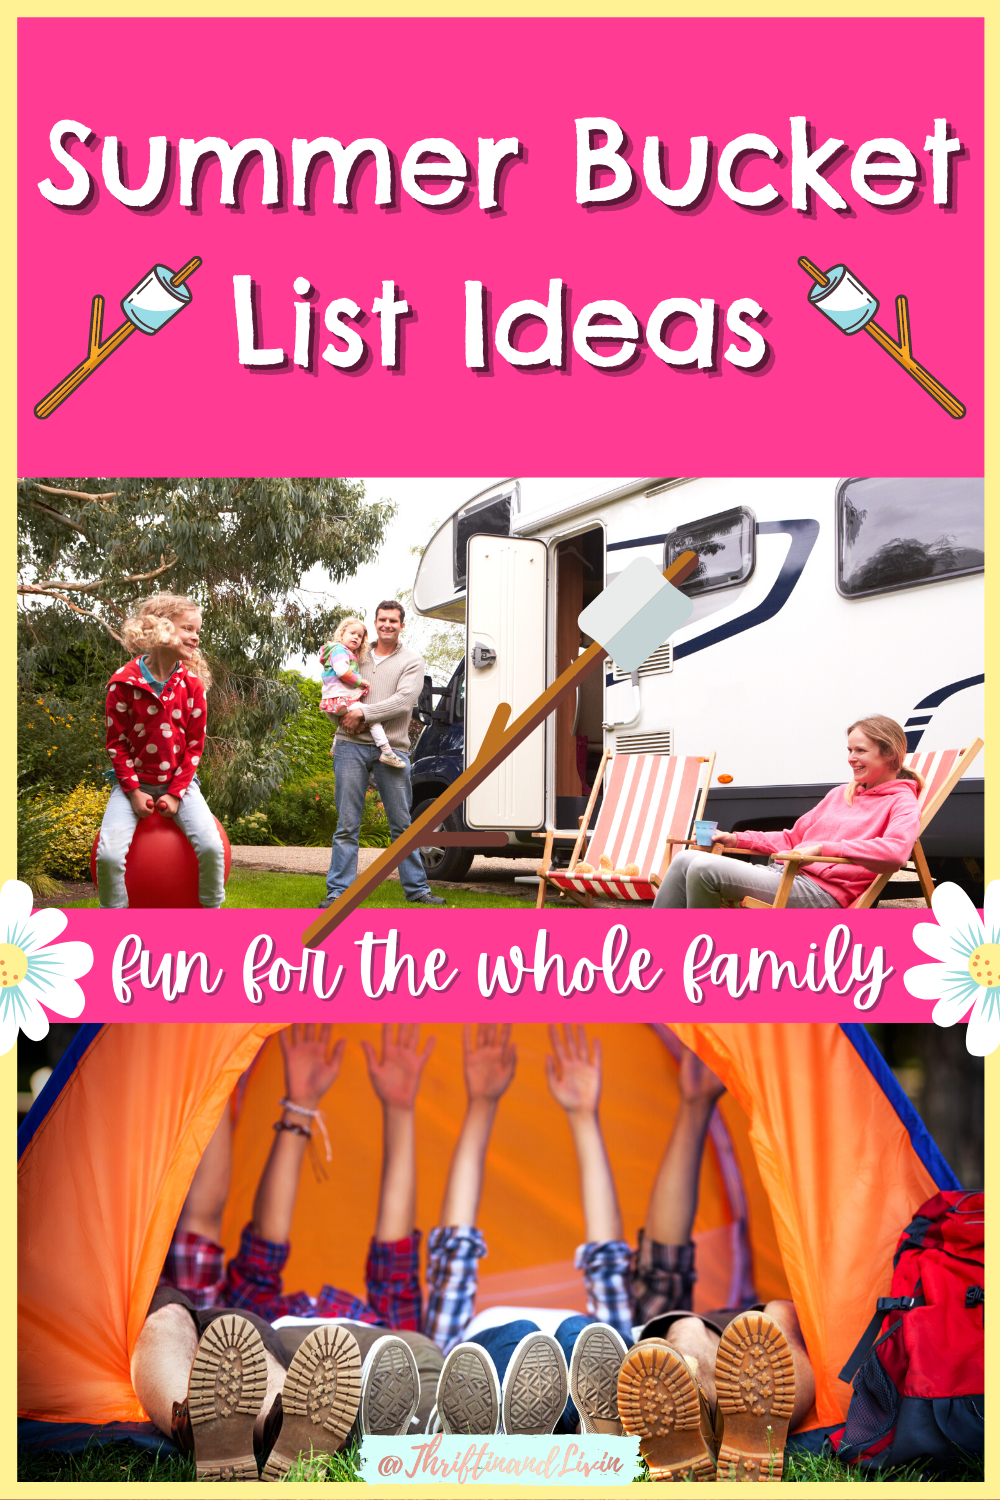 Summer Bucket List Ideas - fun for the whole family Pinterest Pin Image.